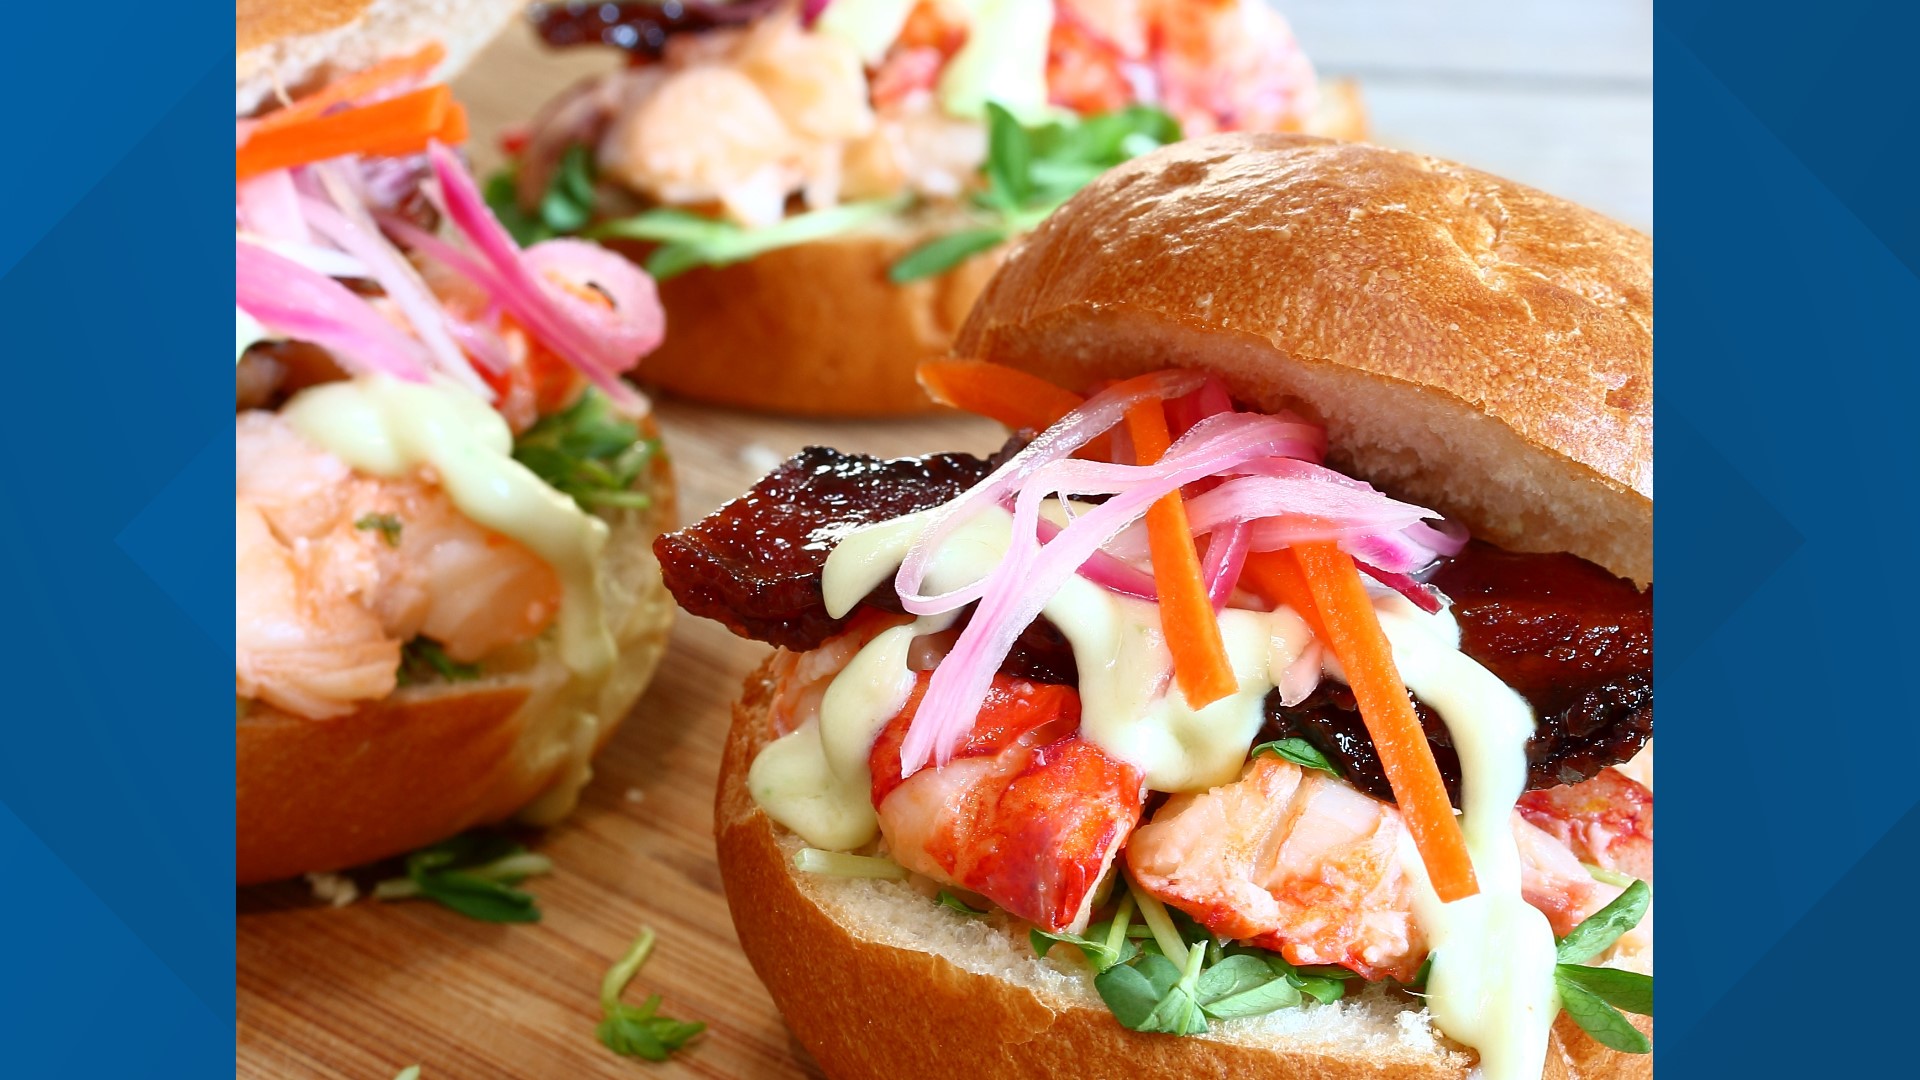 Chef Dana Moos joins us from her kitchen to prepare Lobster Sliders